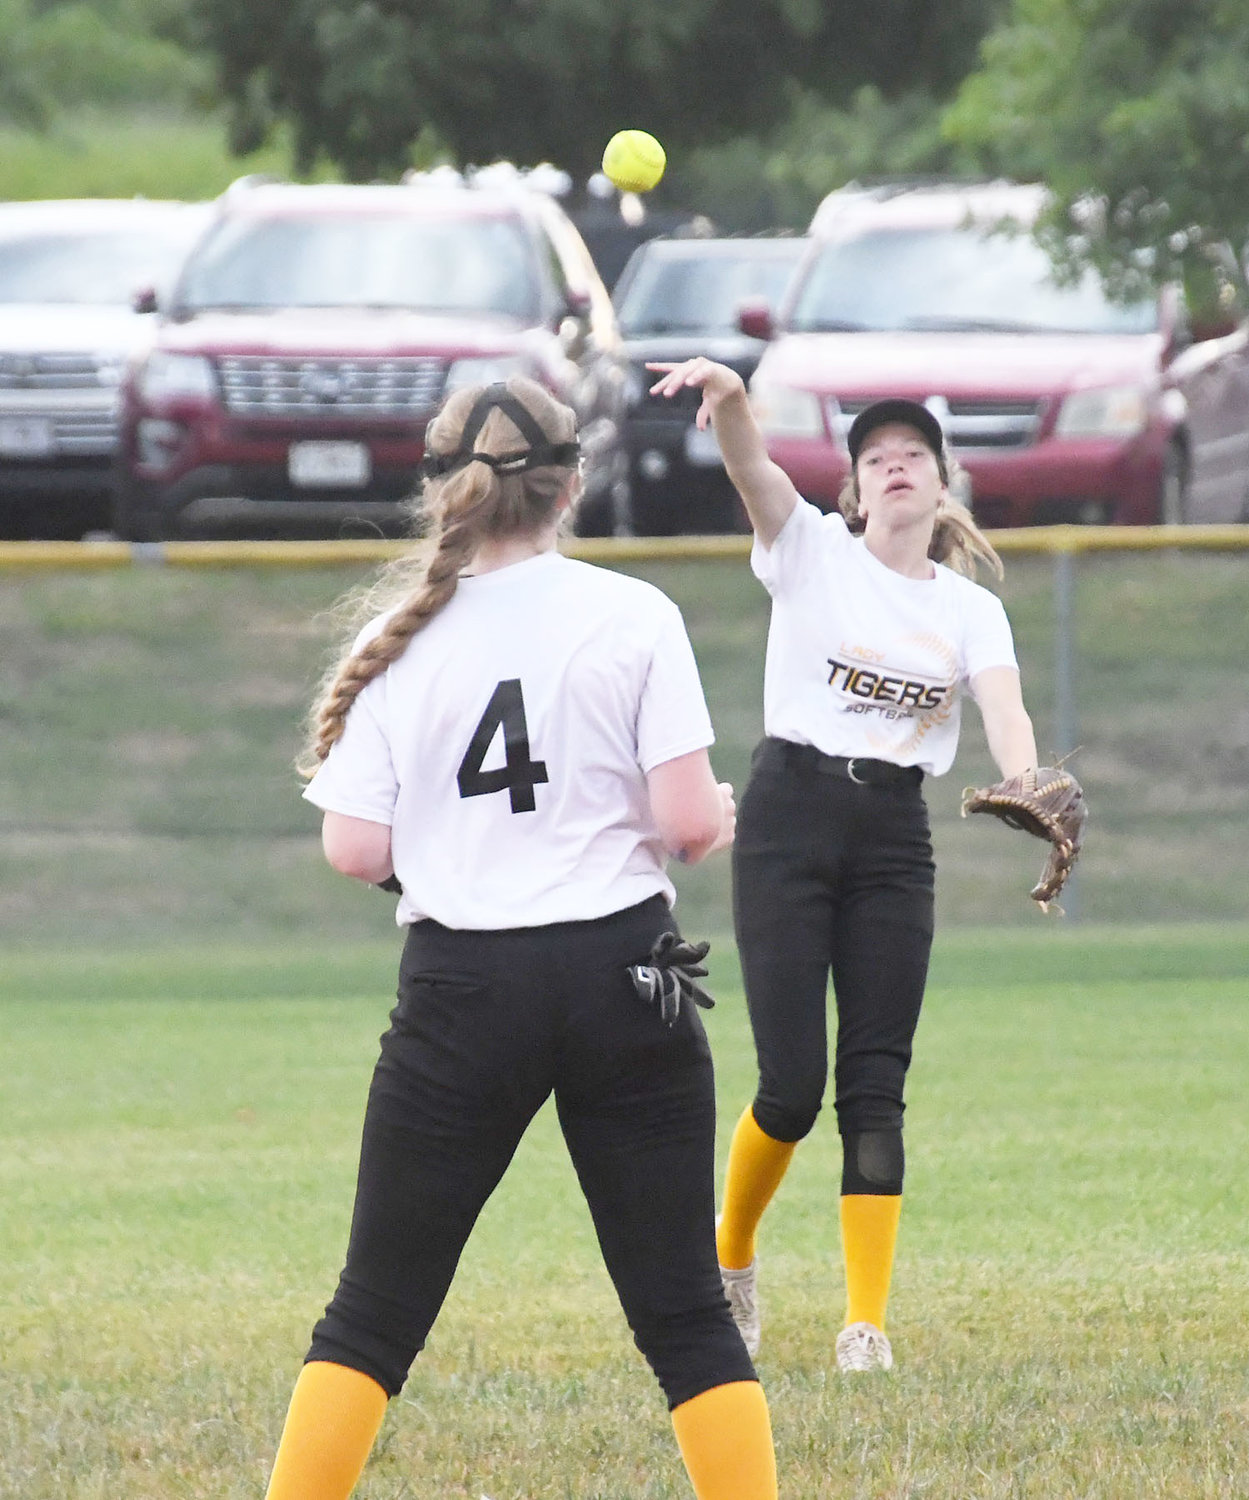 Raegan Derboven throws the ball toward the infield during a defensive relay.